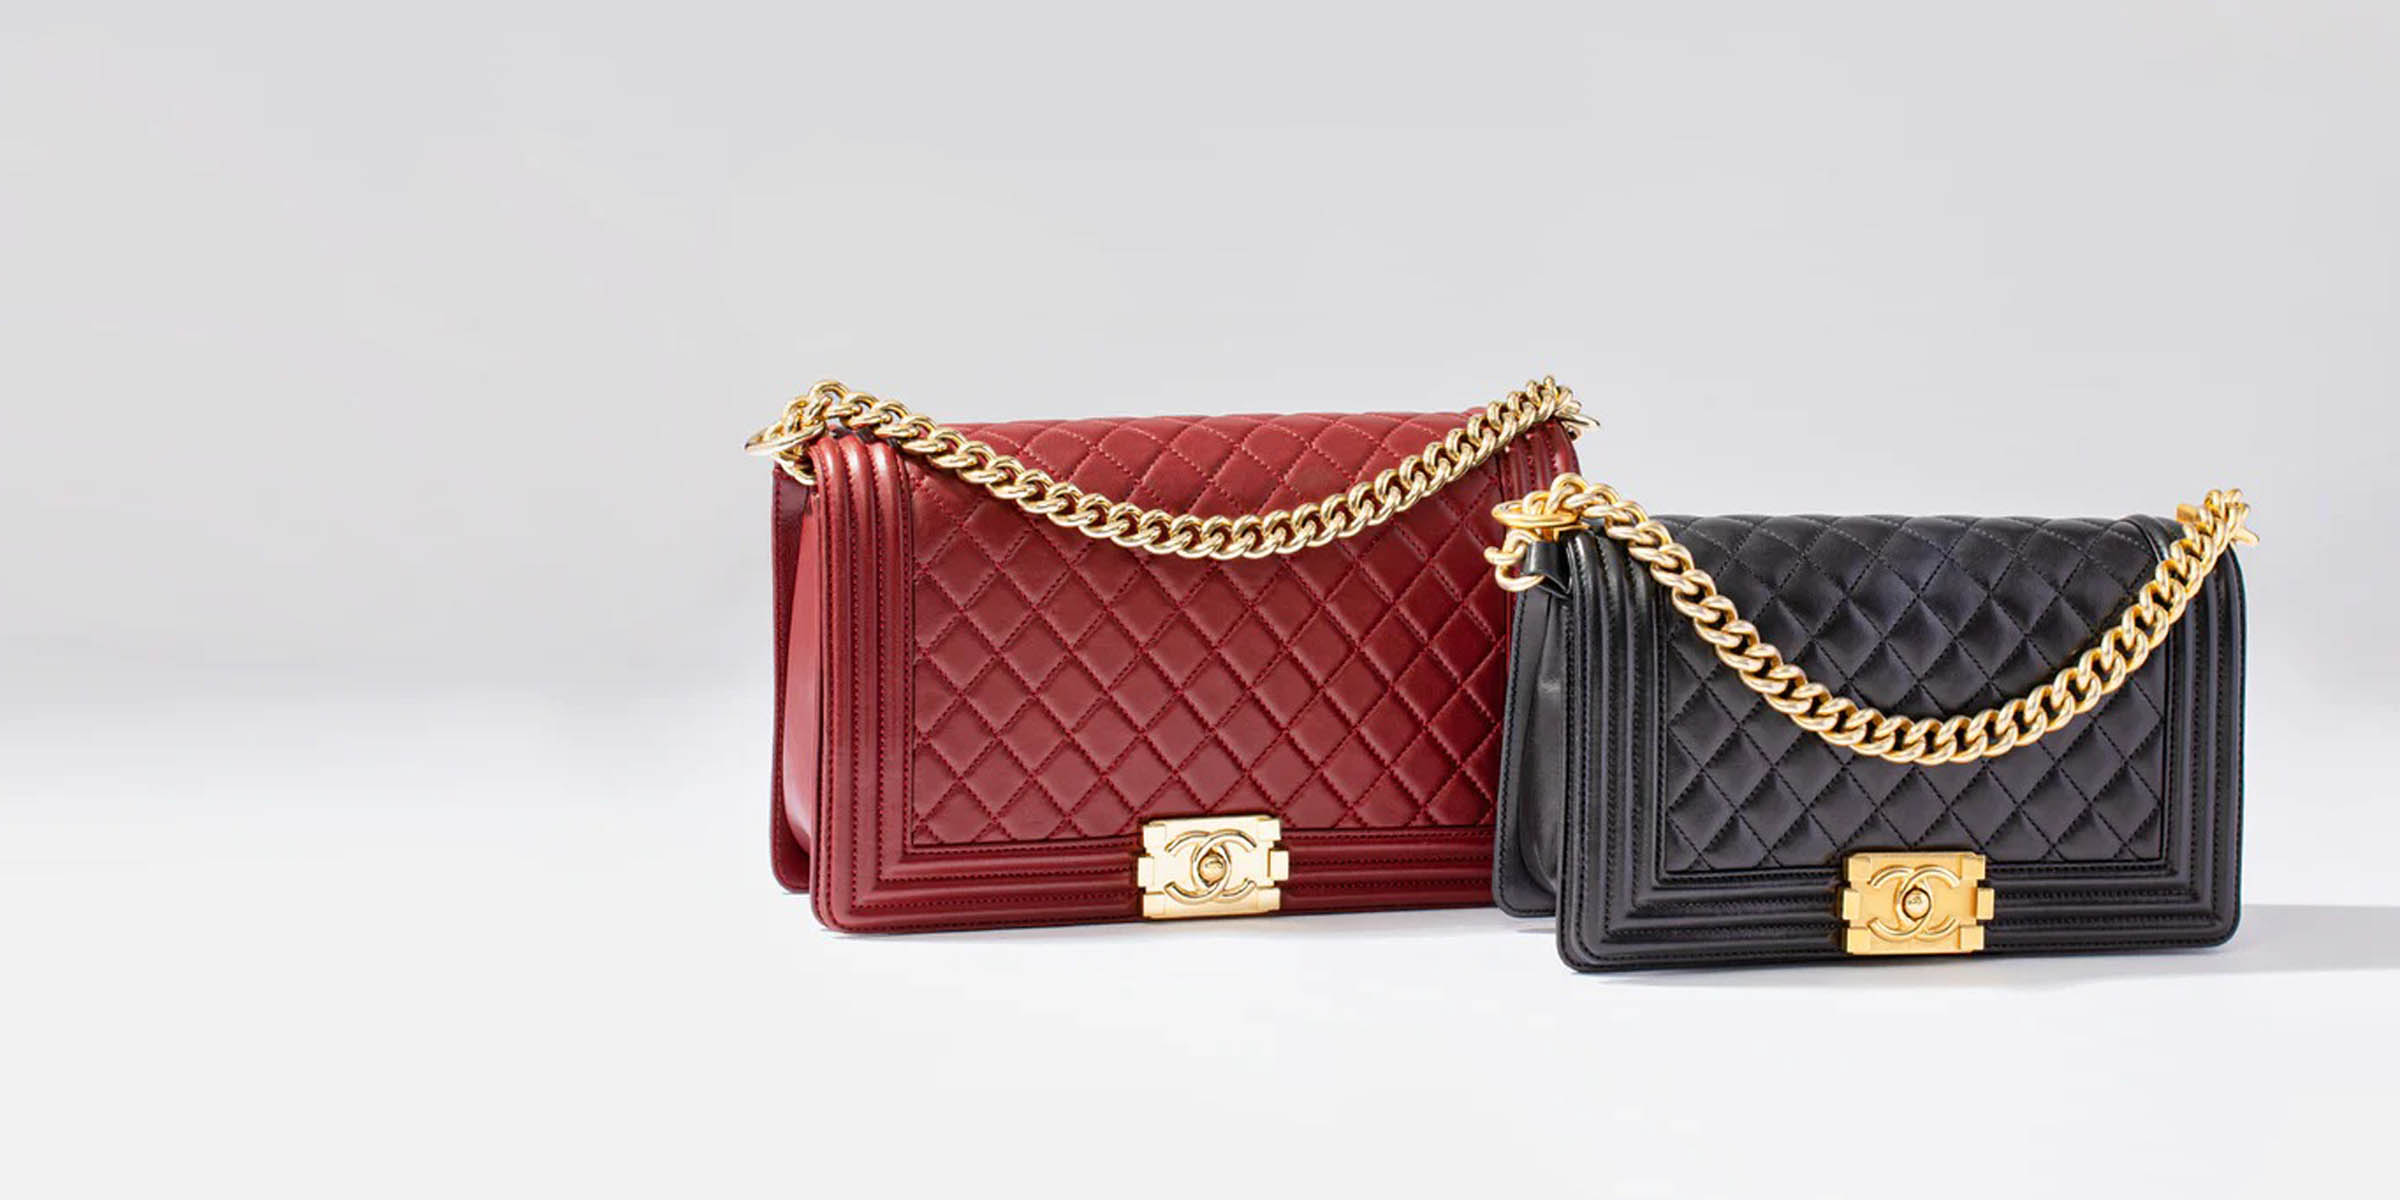 Discounted Chanel Bags  Chanel Bags On Sale  Madison Avenue Couture